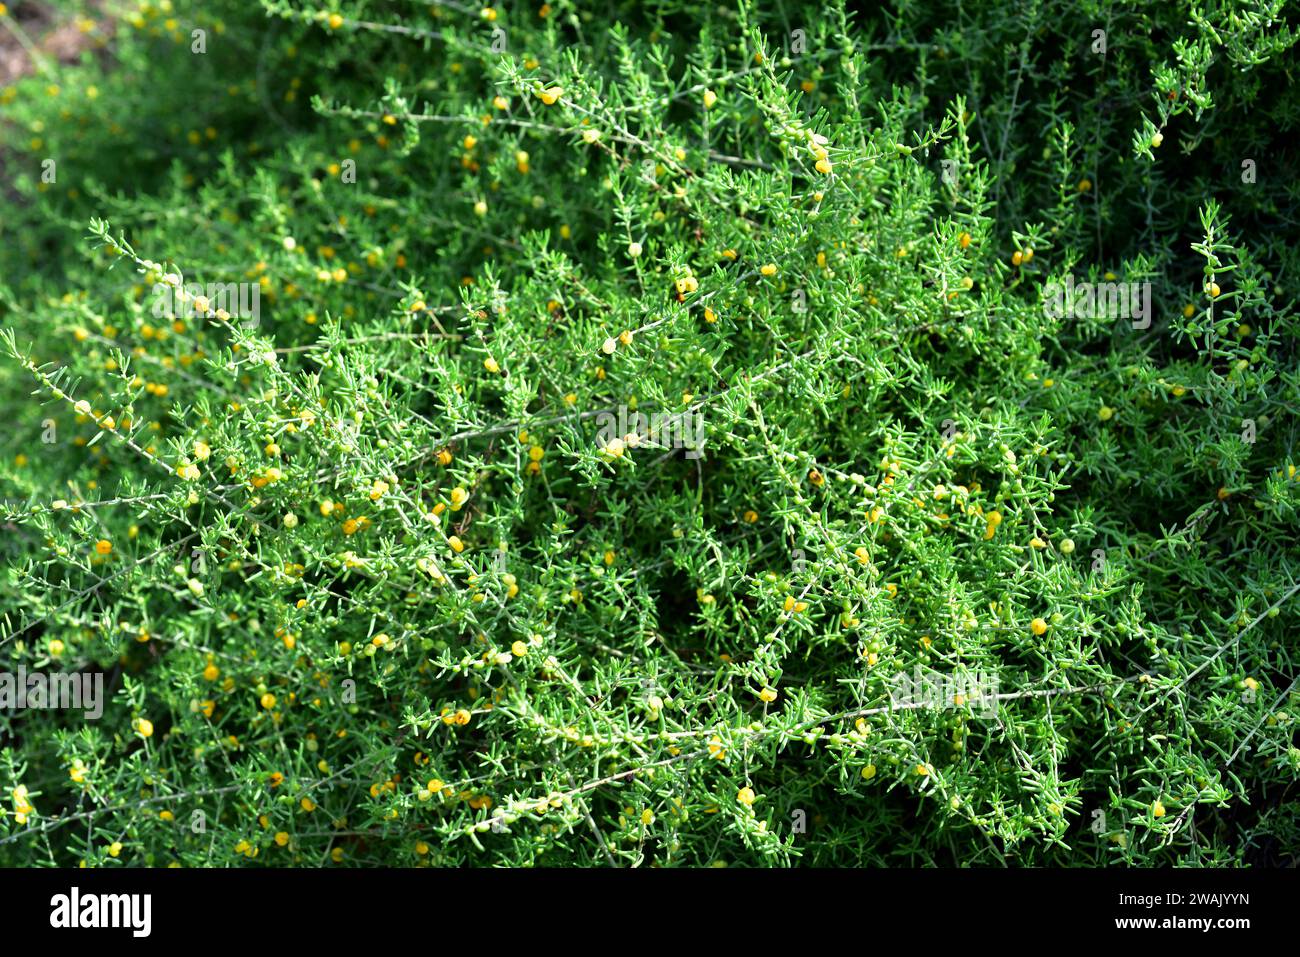 Barrier saltbush (Enchylaena tomentosa) is a shrub native to Australia. Its fruits (berries) are edible. Stock Photo